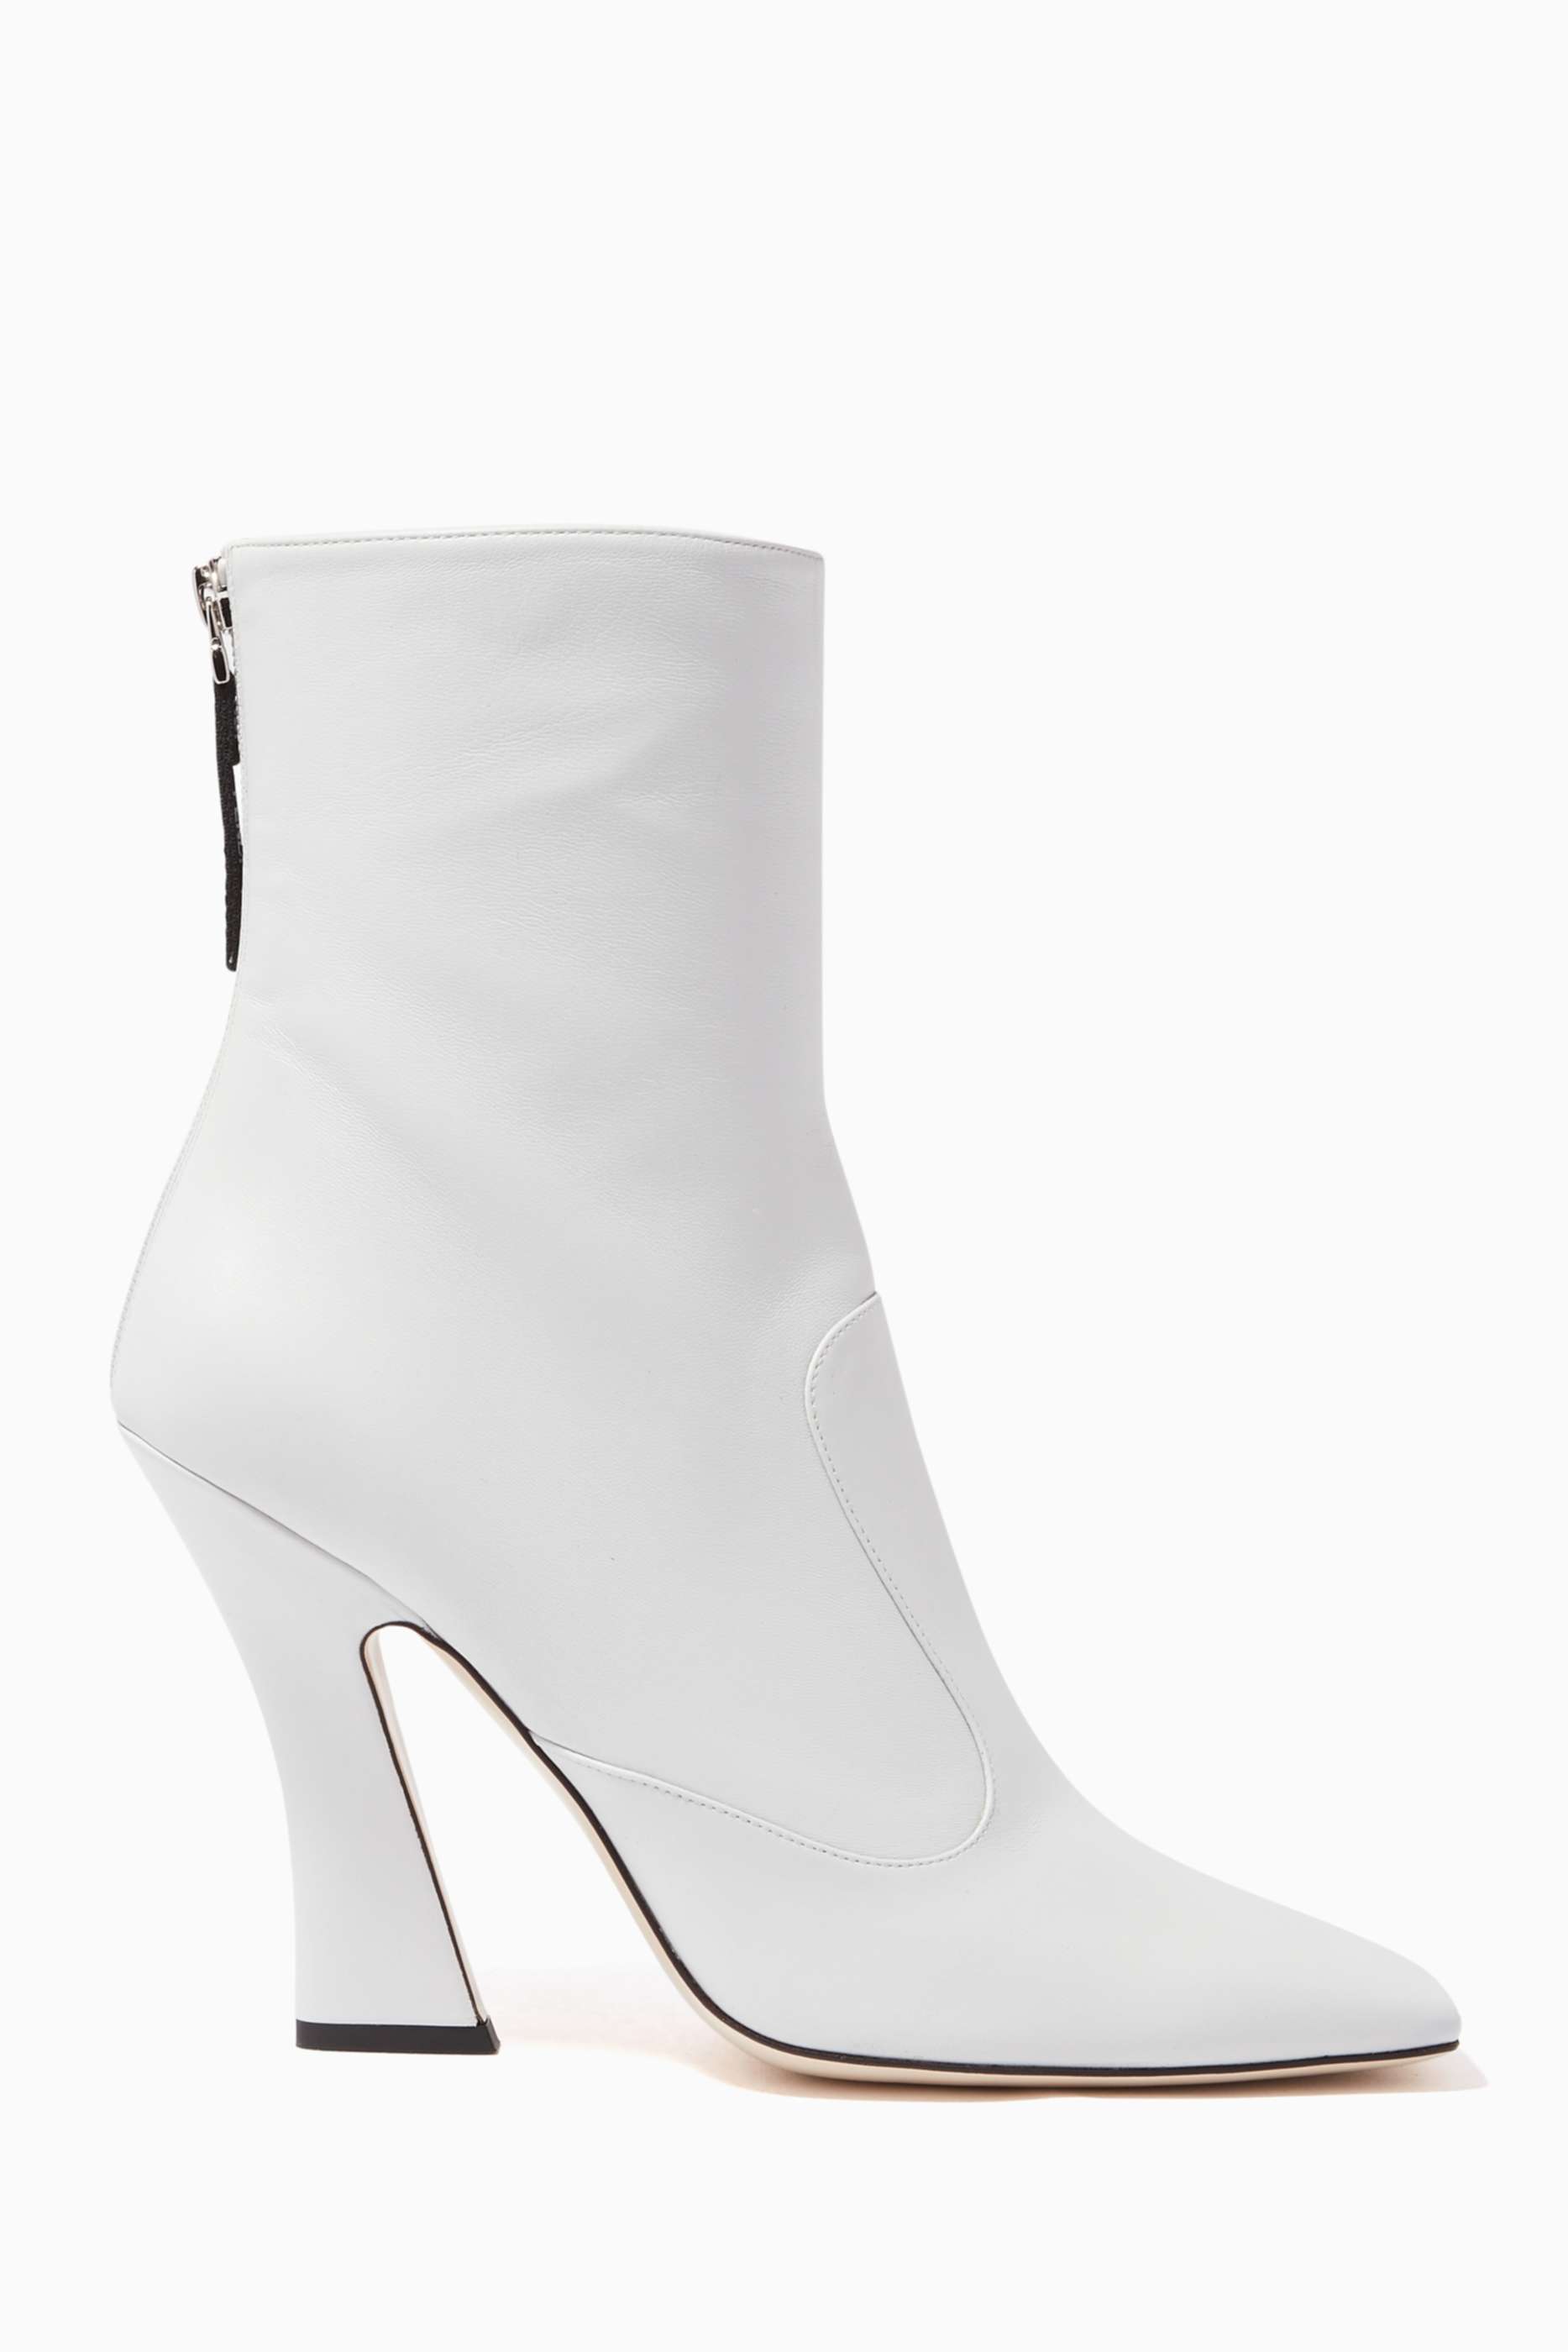 Shop Fendi White Square-Toe Leather Ankle Boots for Women | Ounass UAE